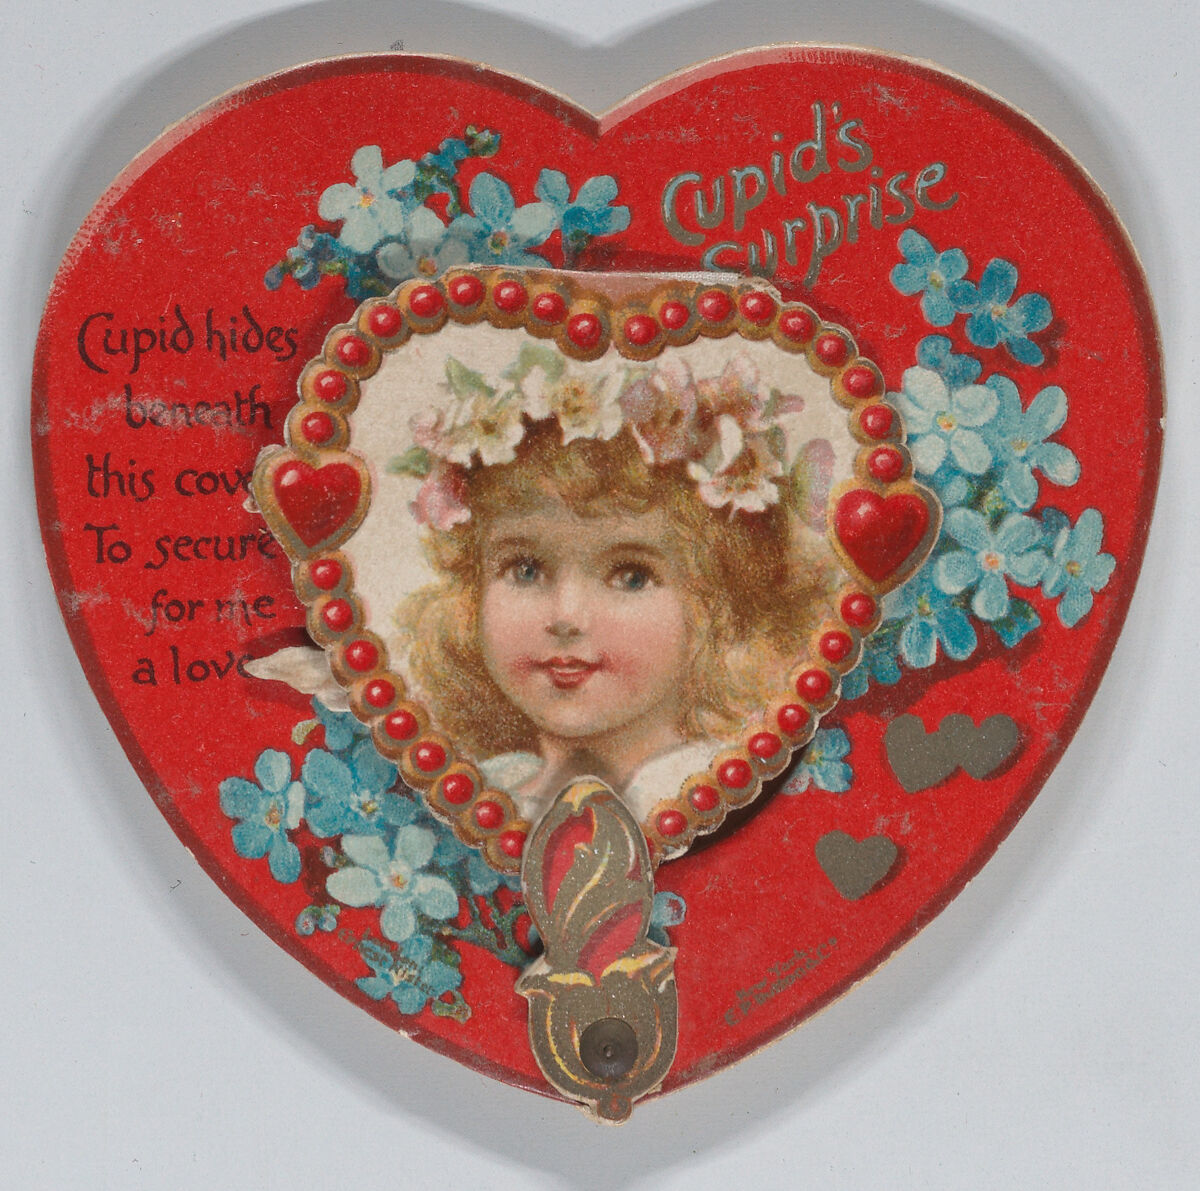 Valentine - Mechanical - Heart opens to reveal Cupid, Anonymous, British or American, 19th century, Heavy die-cut card stock, chromolithography, brass grommet 